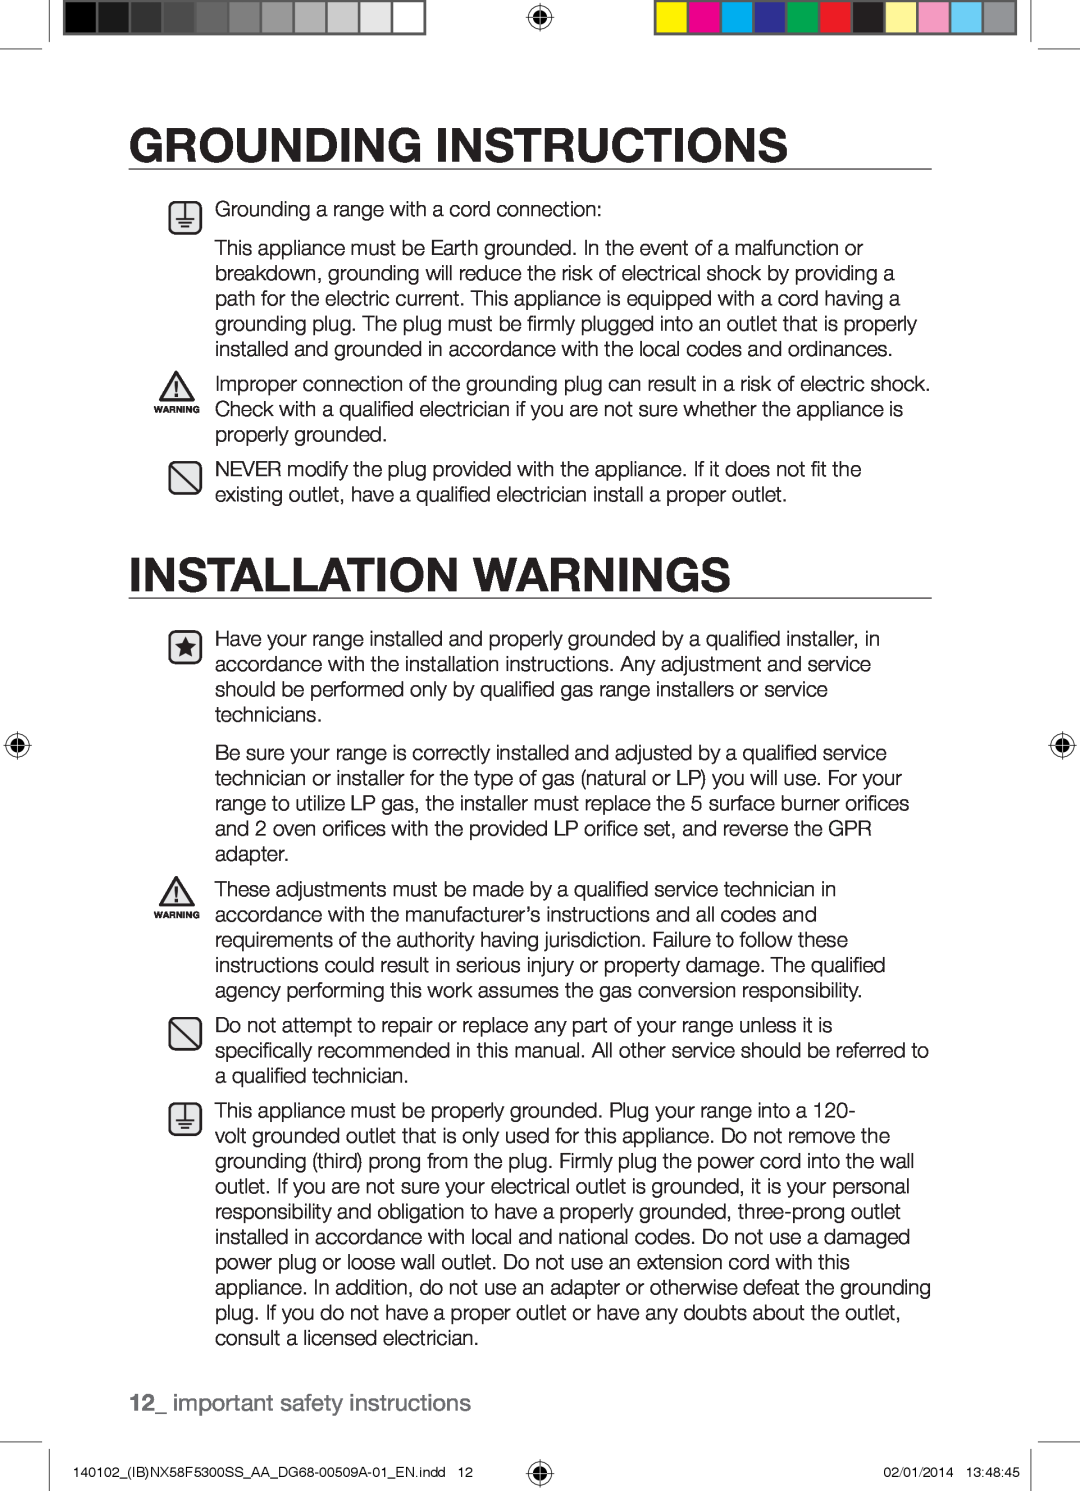 Samsung NX58F5500SW user manual Grounding Instructions, Installation Warnings, important safety instructions 